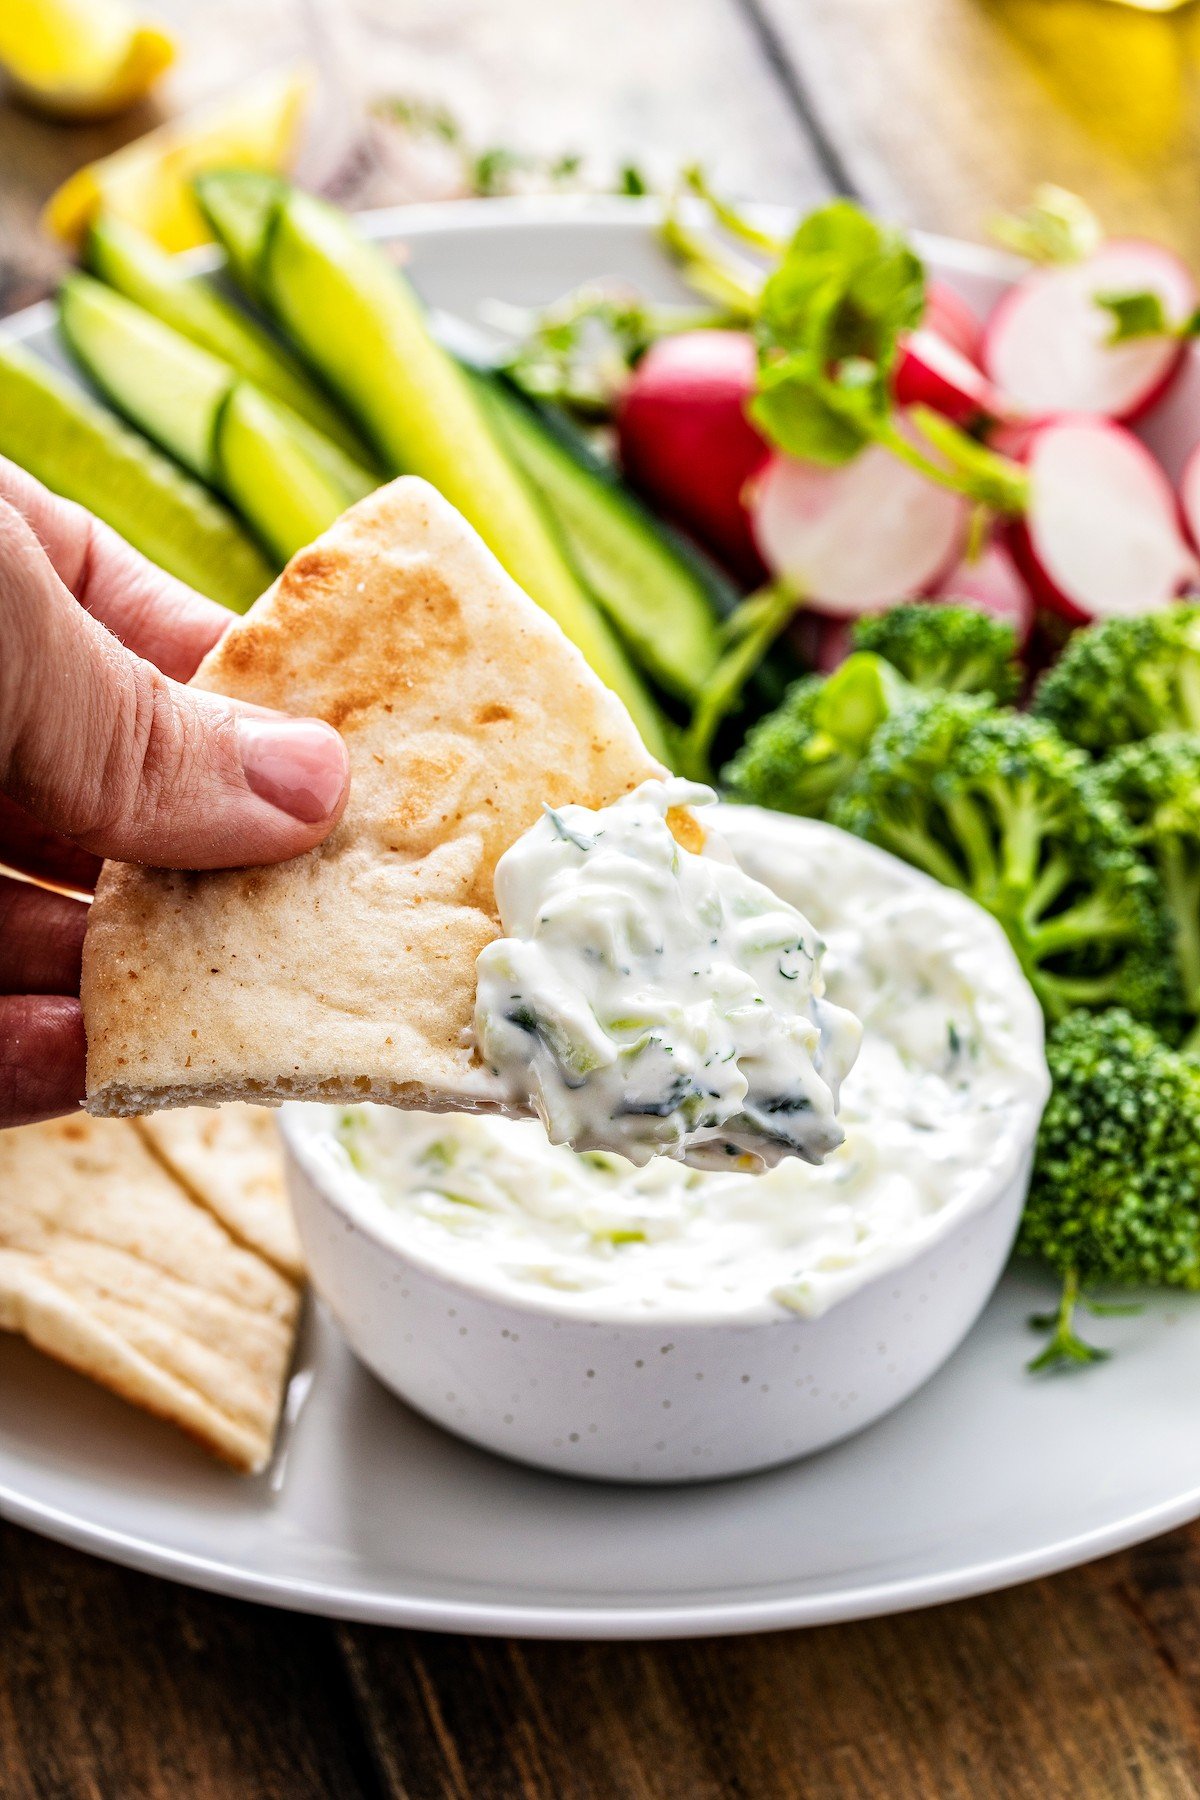 A slice of pita bread with some tzatziki on it.